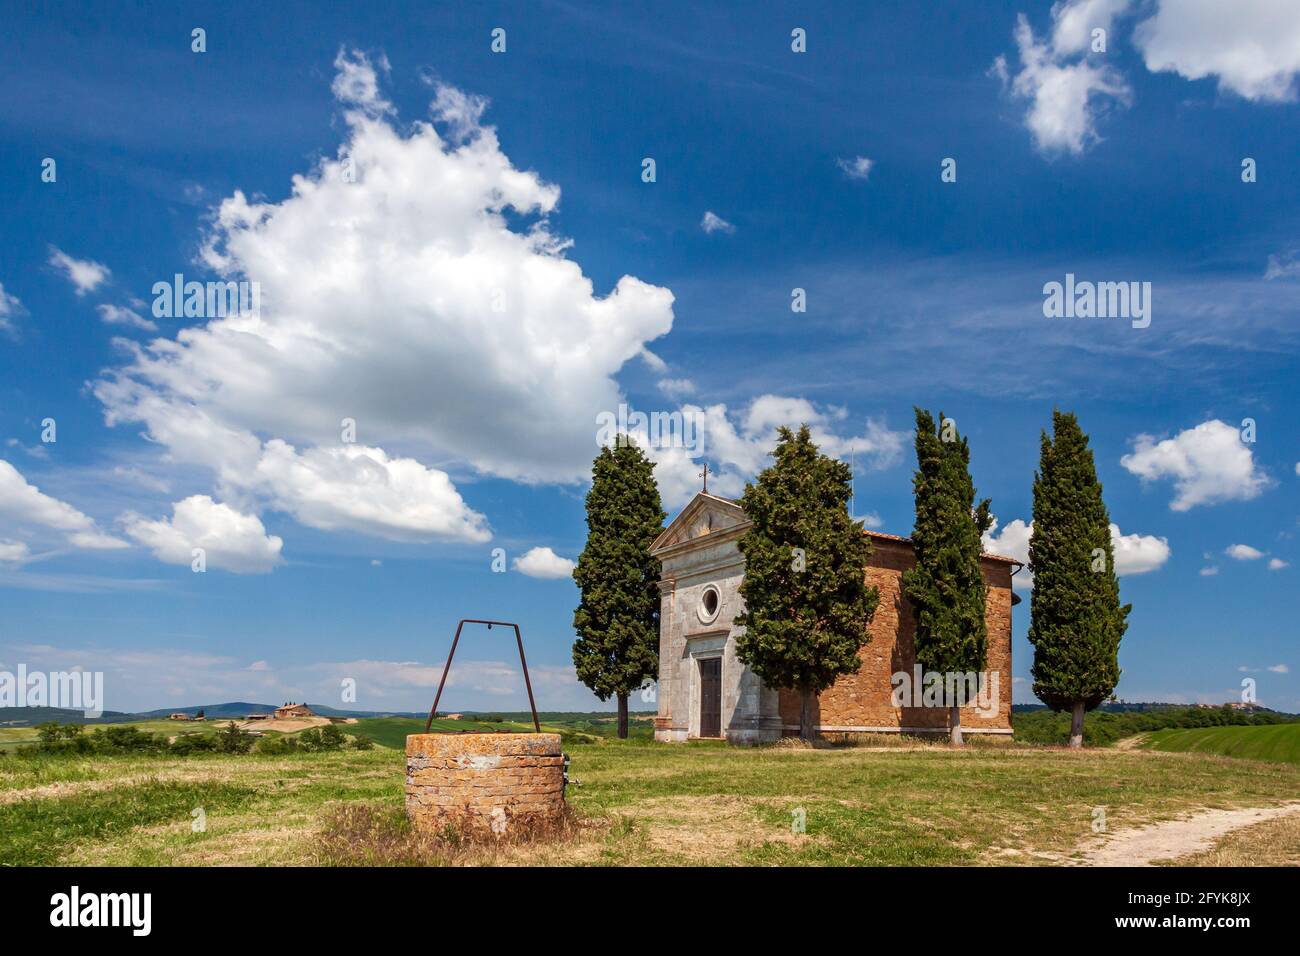 The Chapel of the Madonna di Vitaleta (Cappella di Vitaleta) is a small and beautiful place of worship in the Val d'Orcia landscape in Tuscany, Italy. Stock Photo